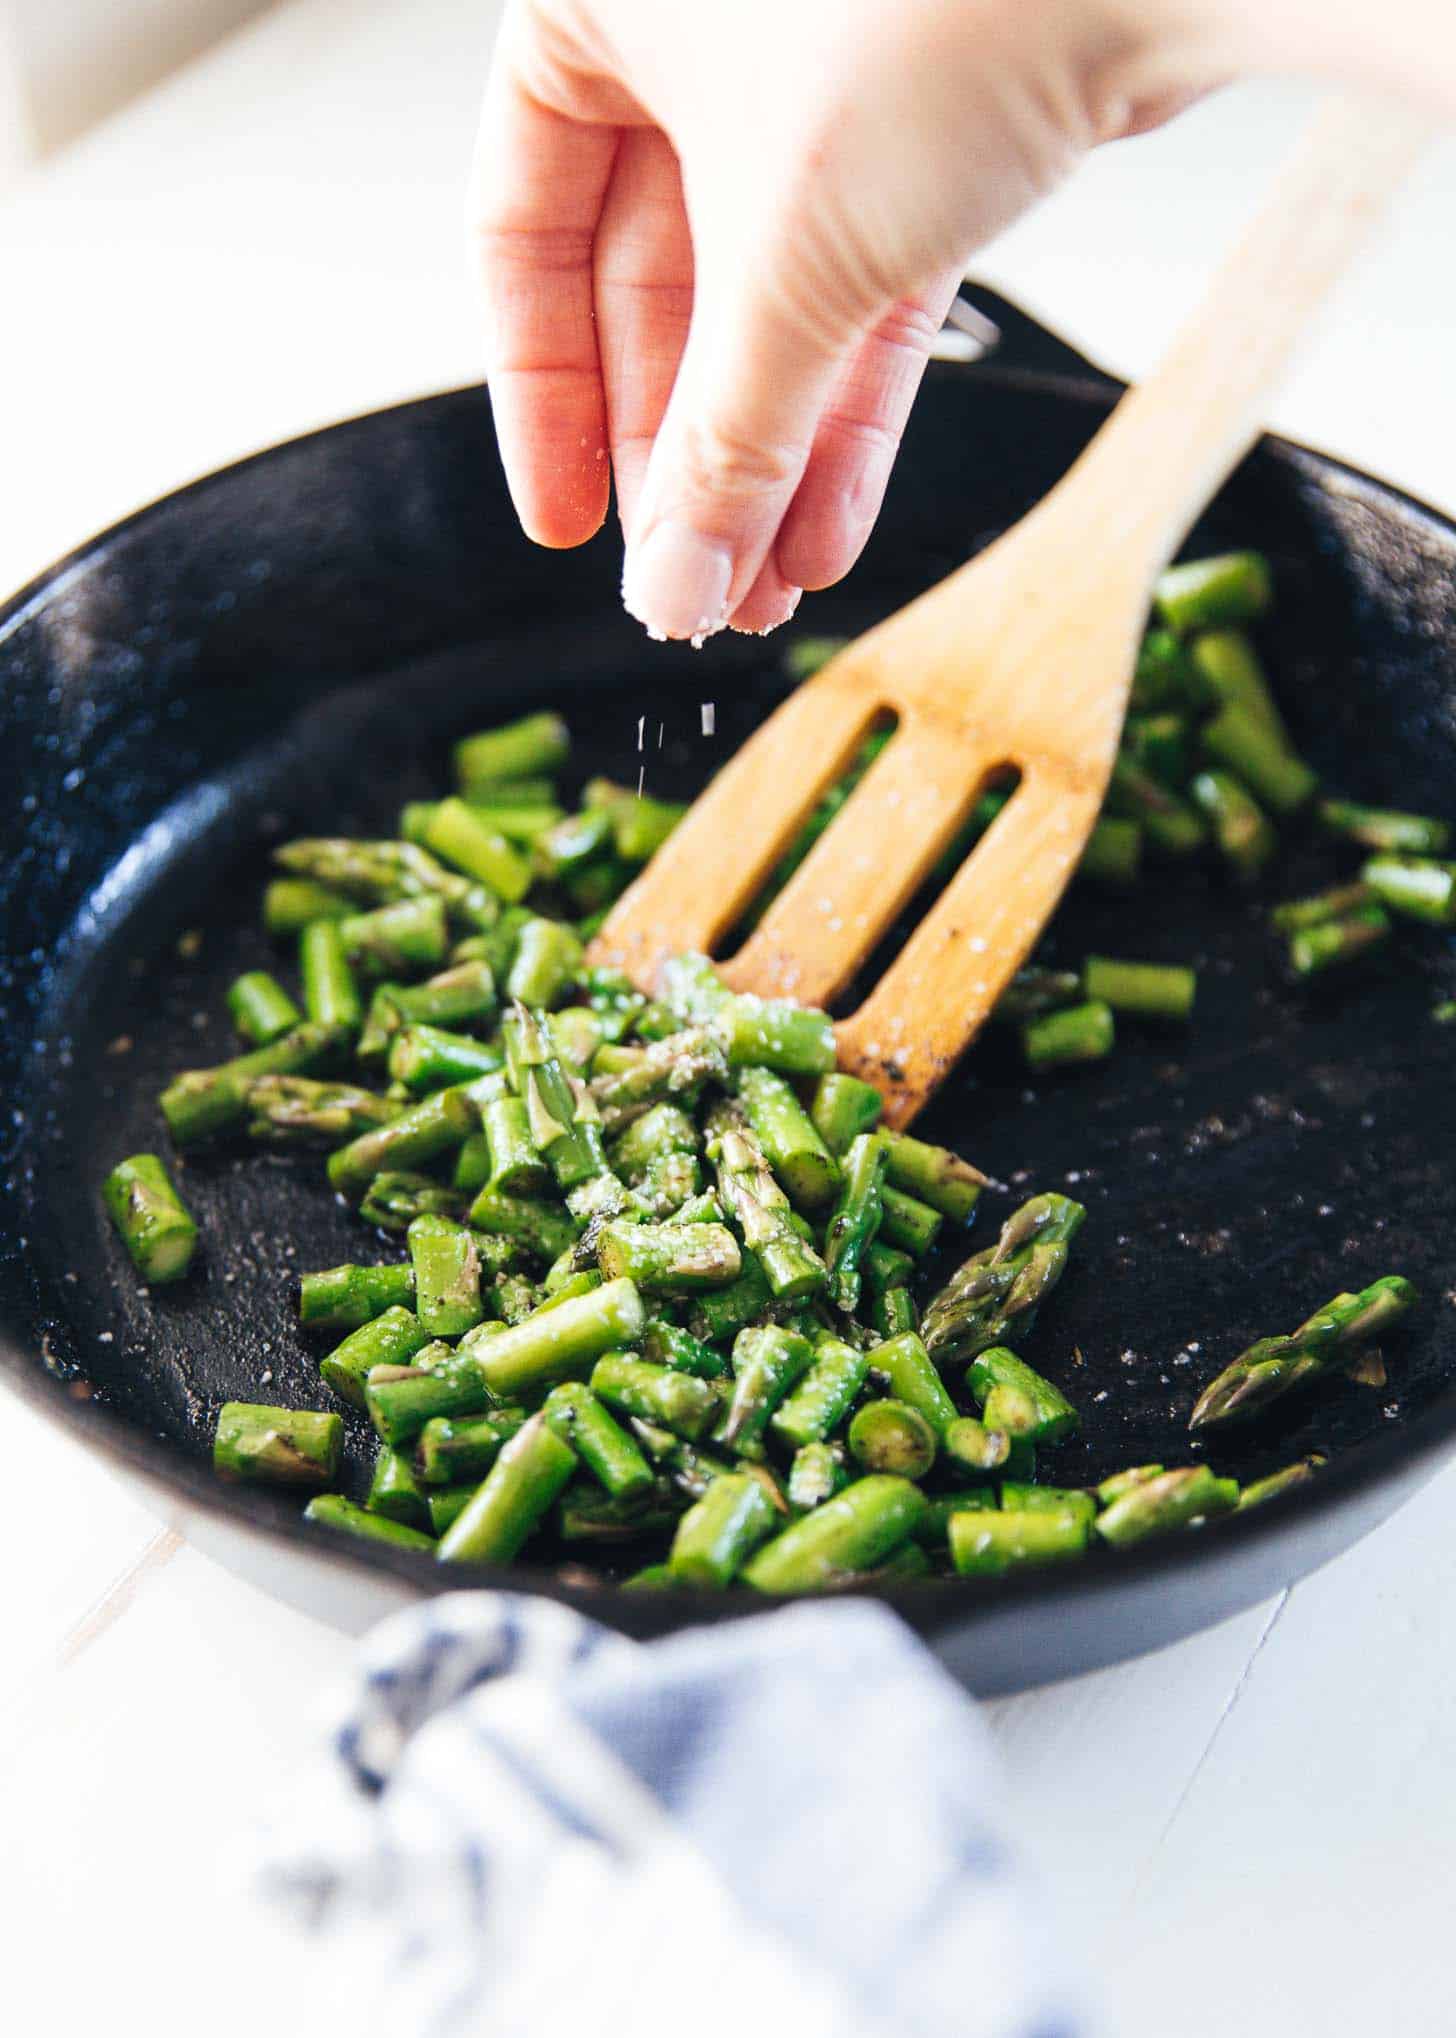 seasoning asparagus in a cast iron skillet